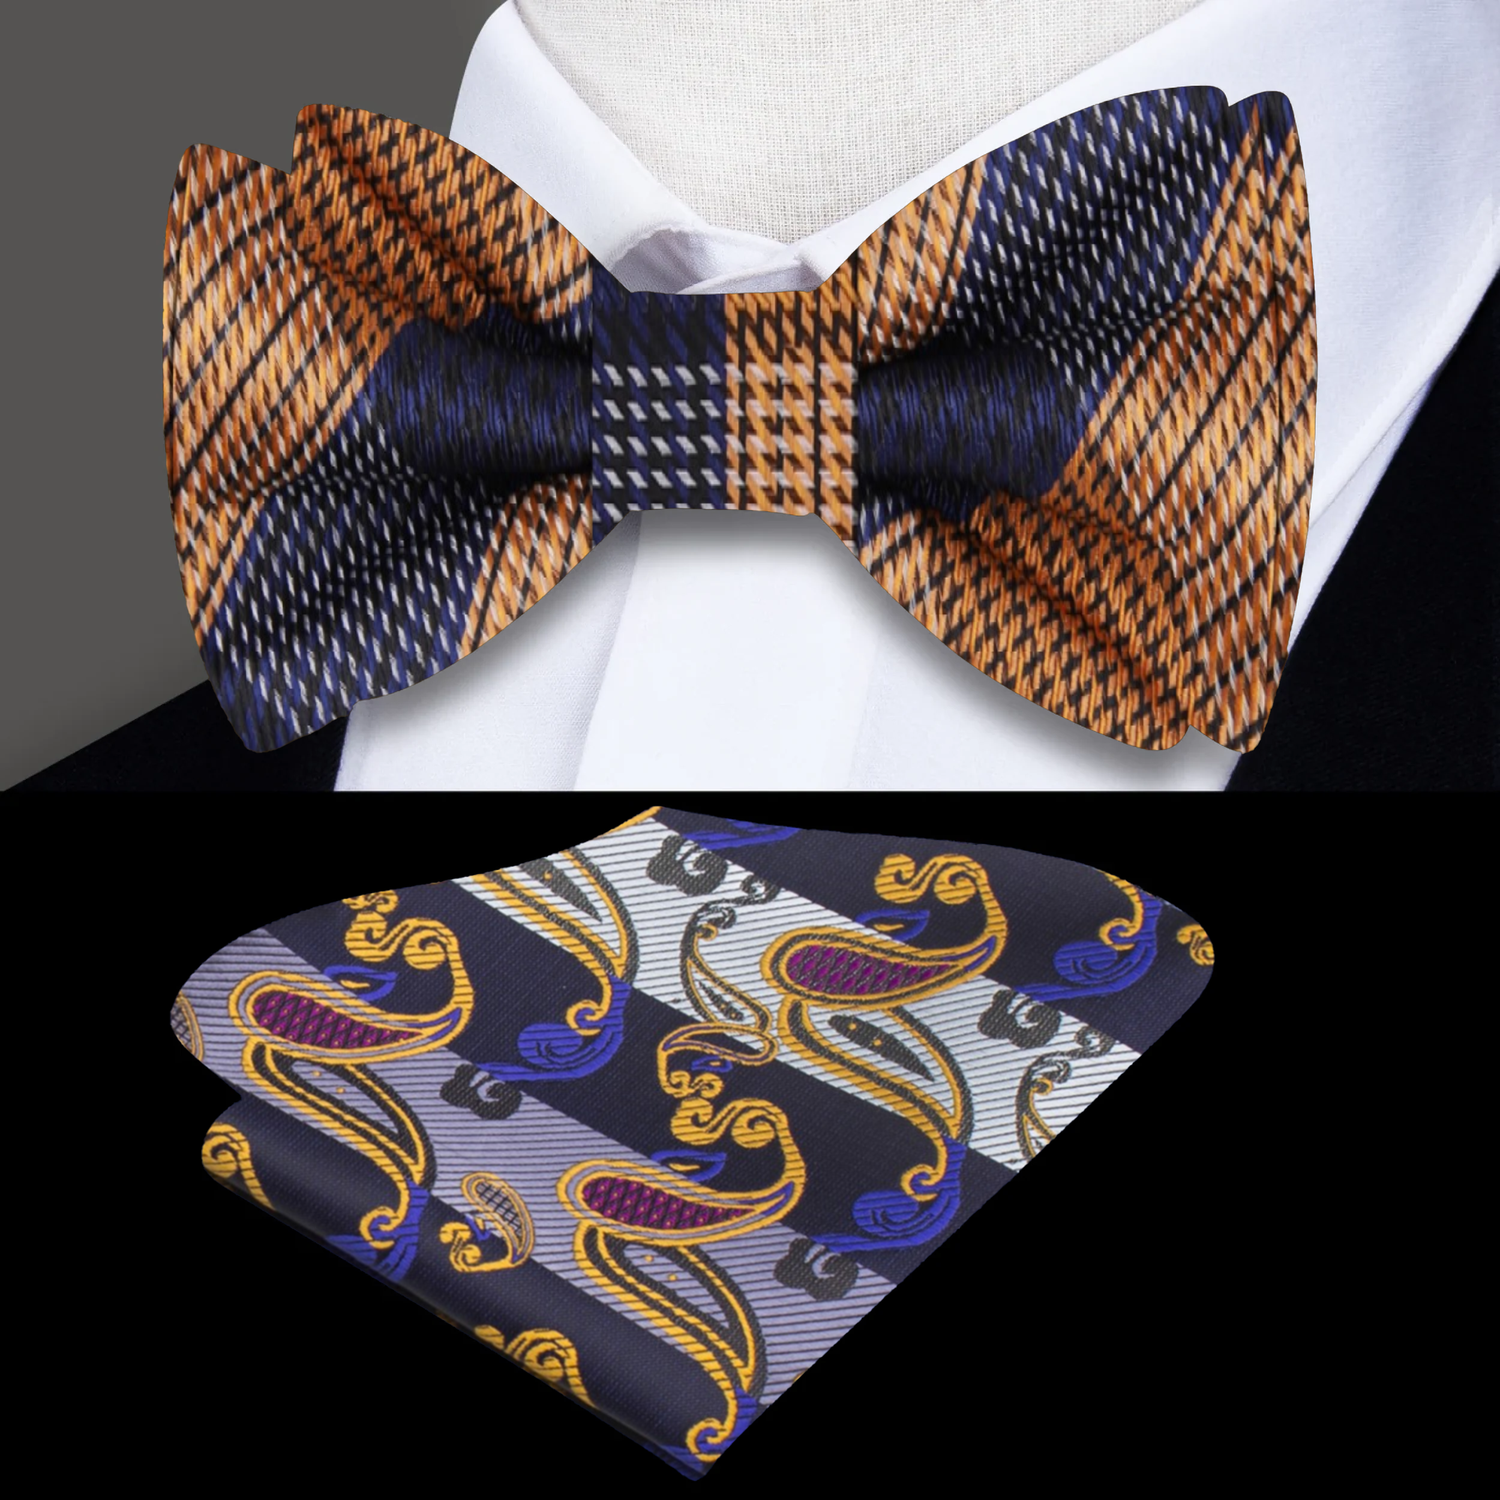 Orange and Blue Plaid Bow Tie and Paisley Square